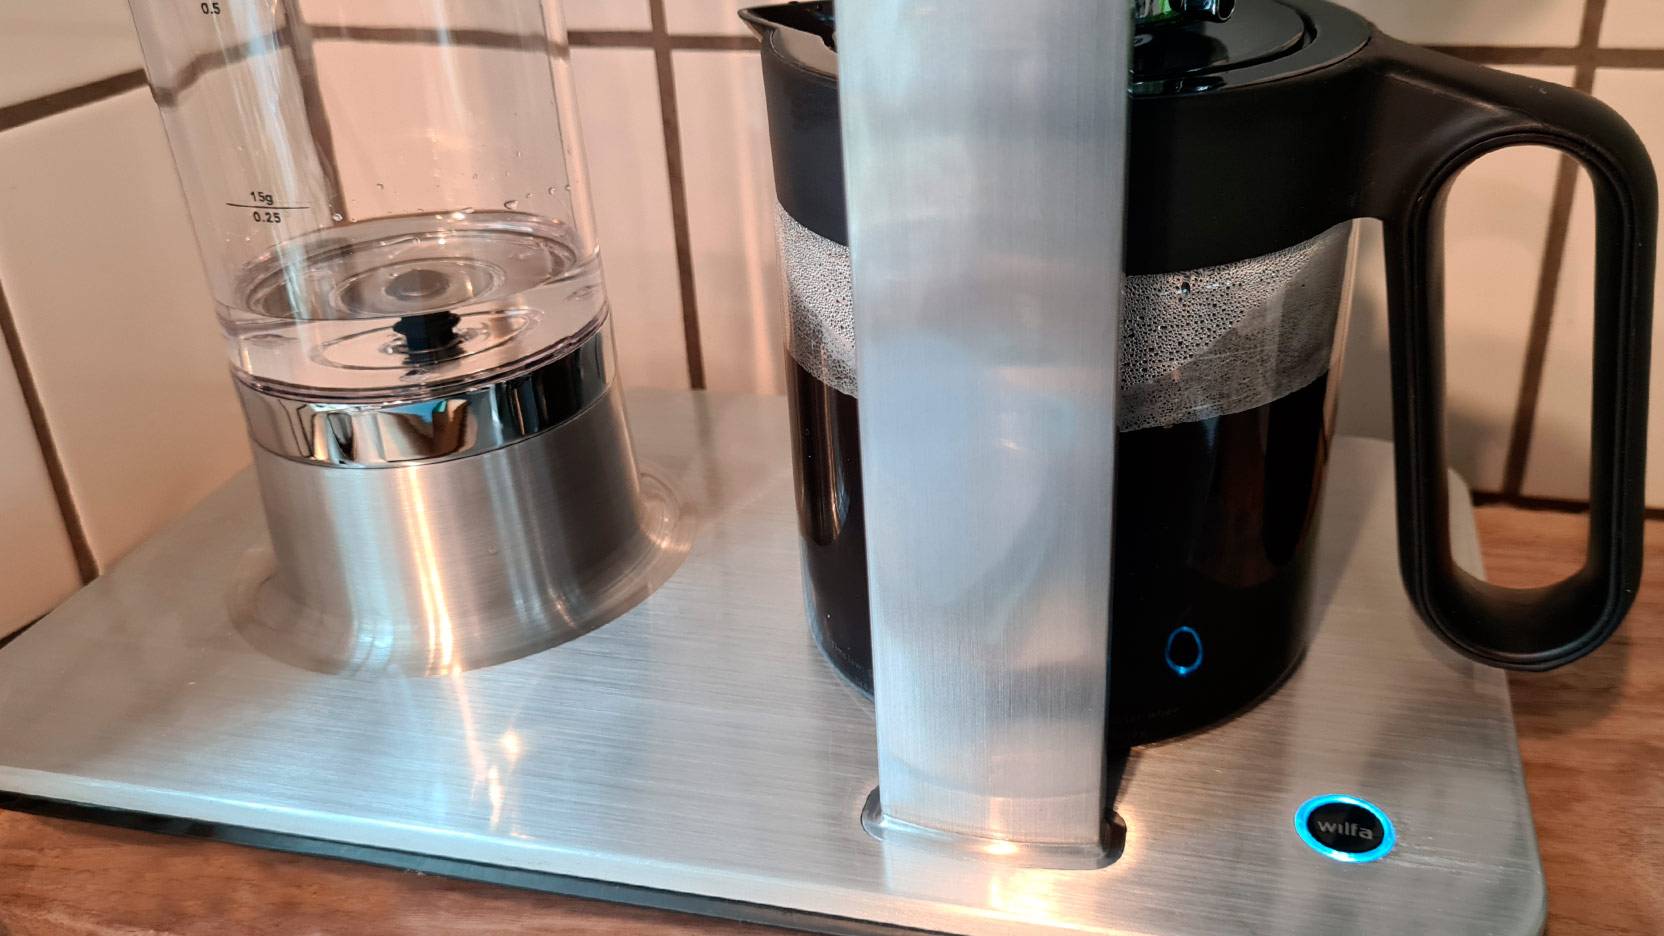 Image of Wilfa Svart Precision, which has almost brewed a whole jug of coffee